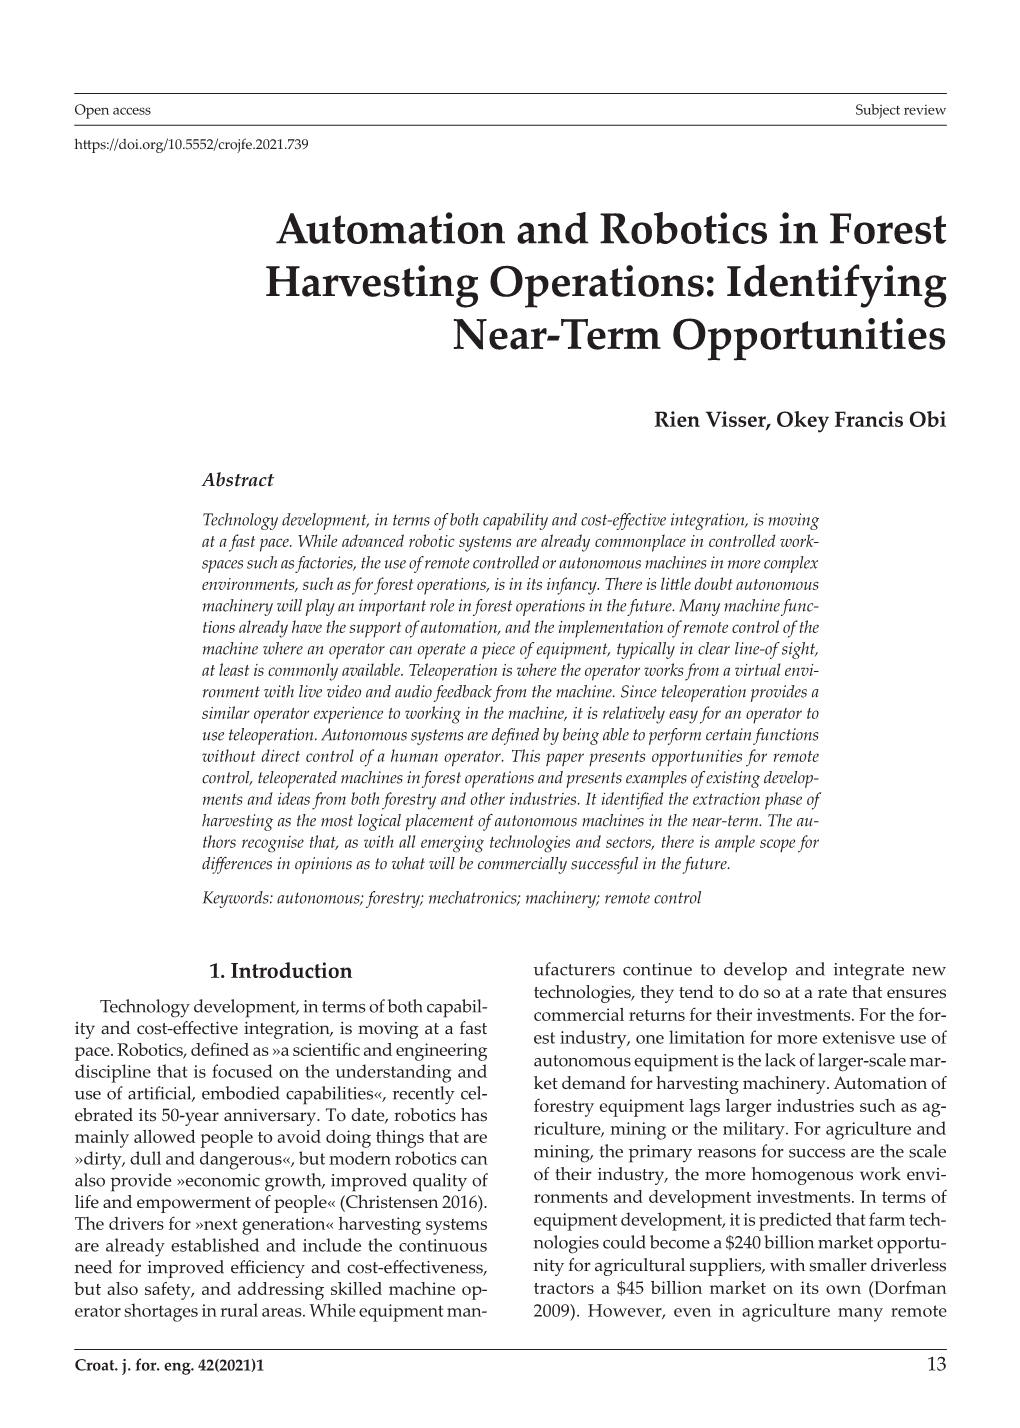 Automation and Robotics in Forest Harvesting Operations: Identifying Near-Term Opportunities